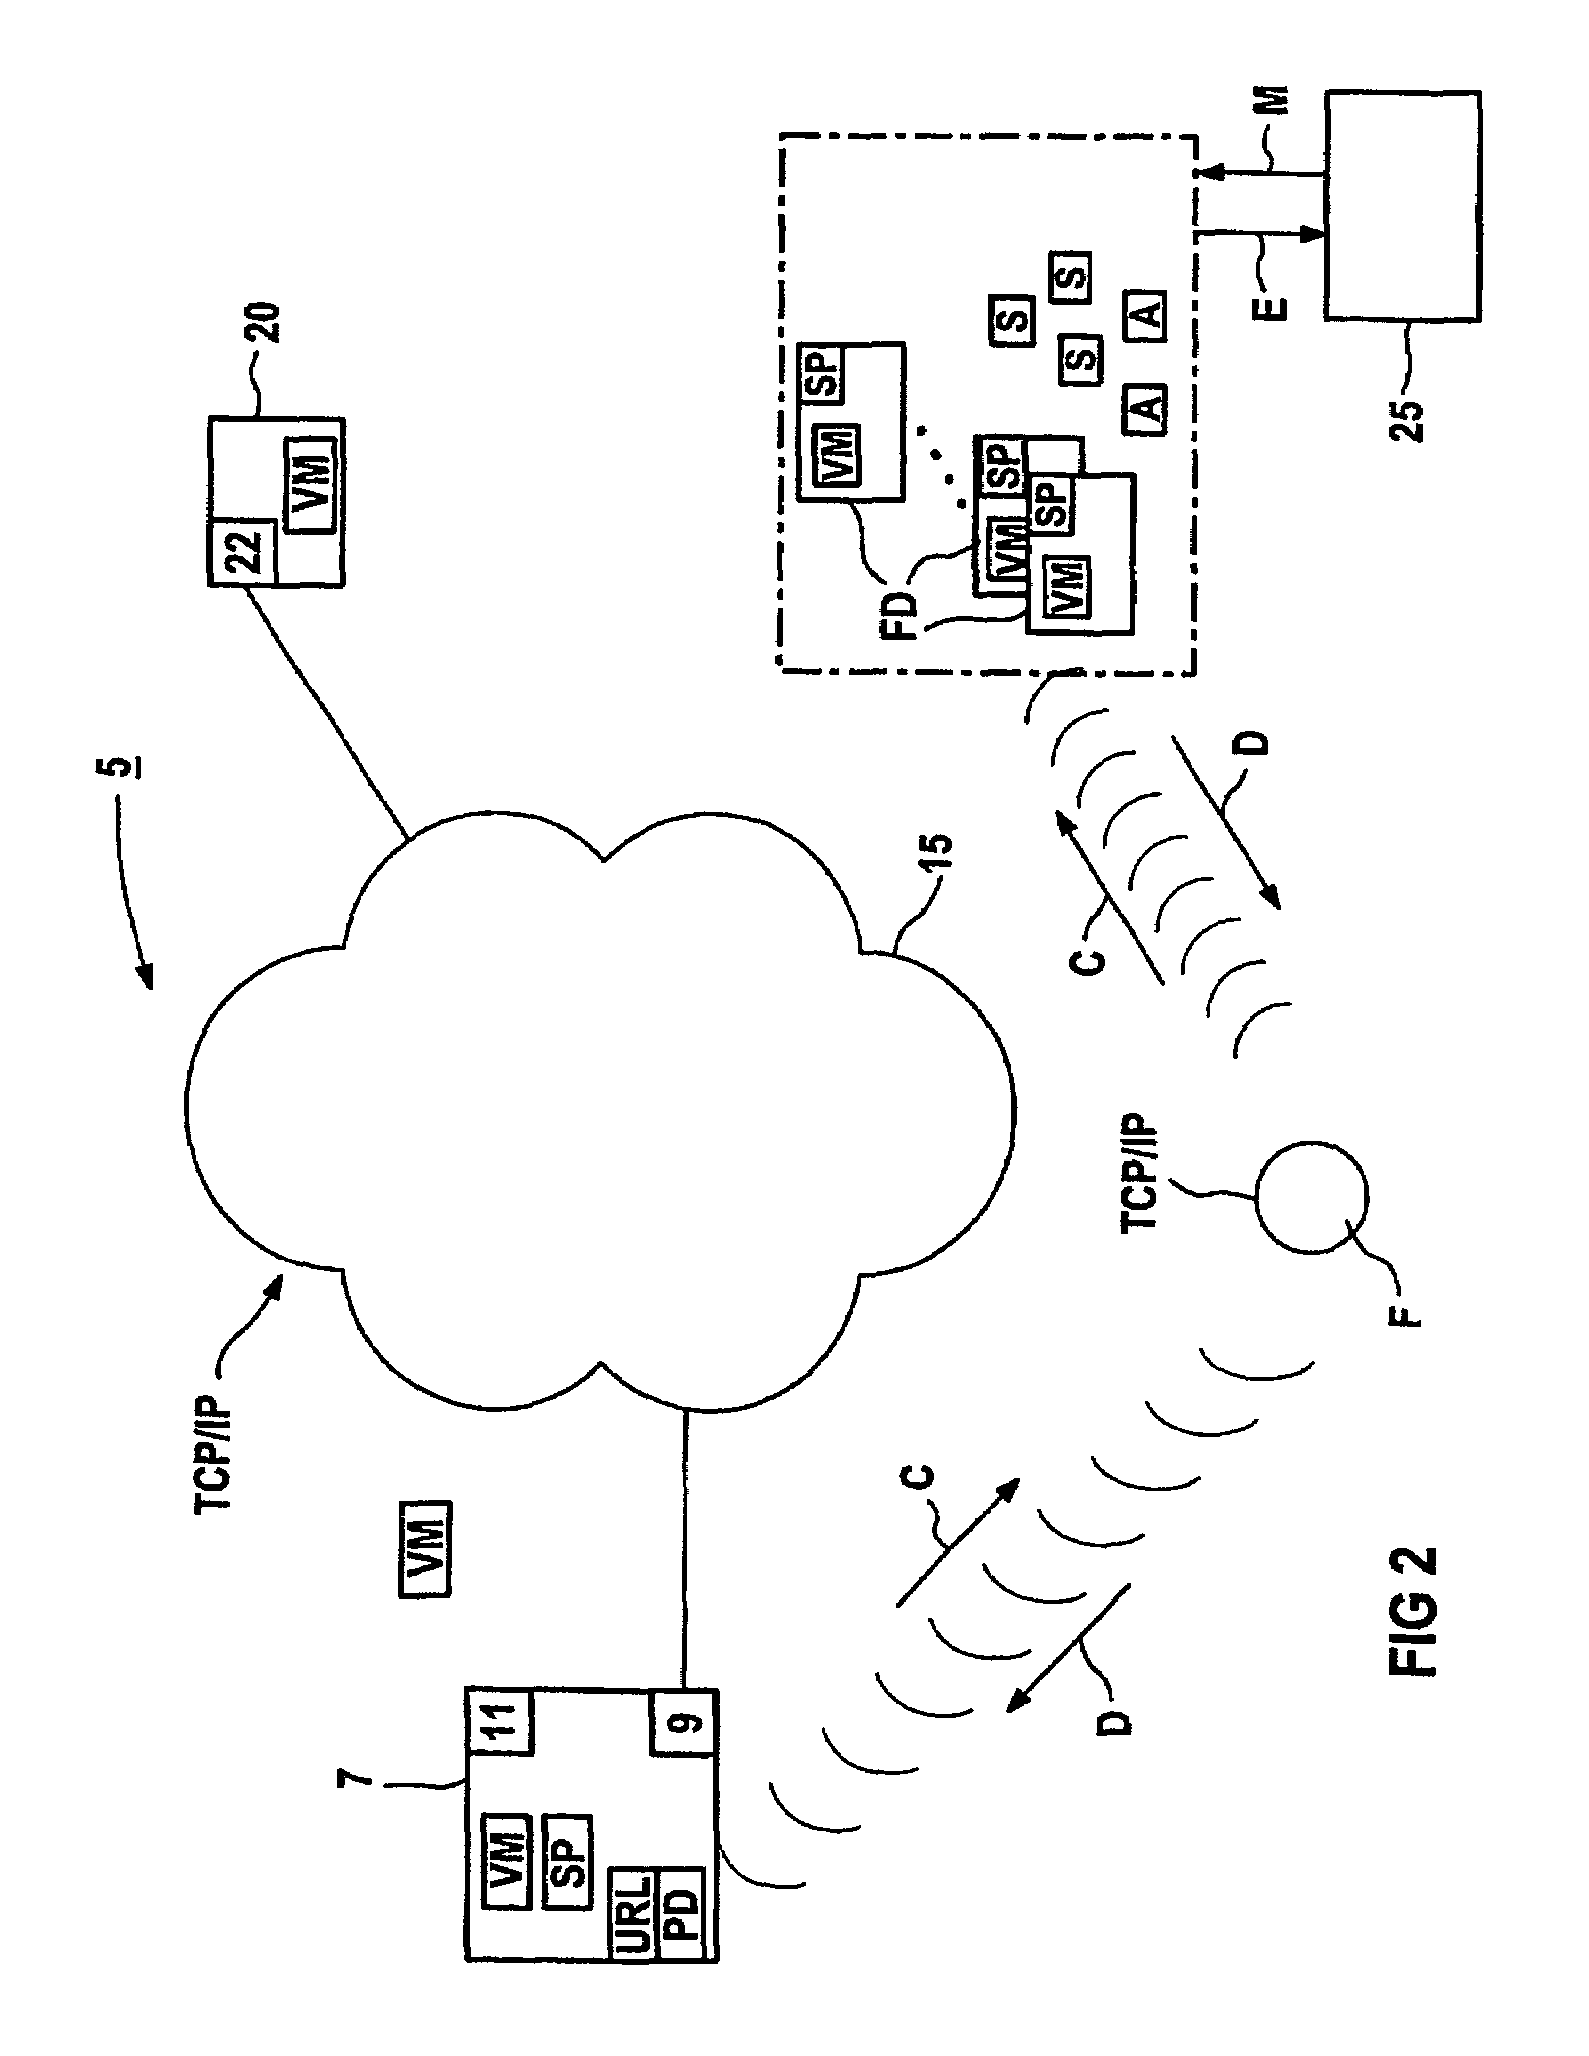 Method and process management system for the operation of a technical plant